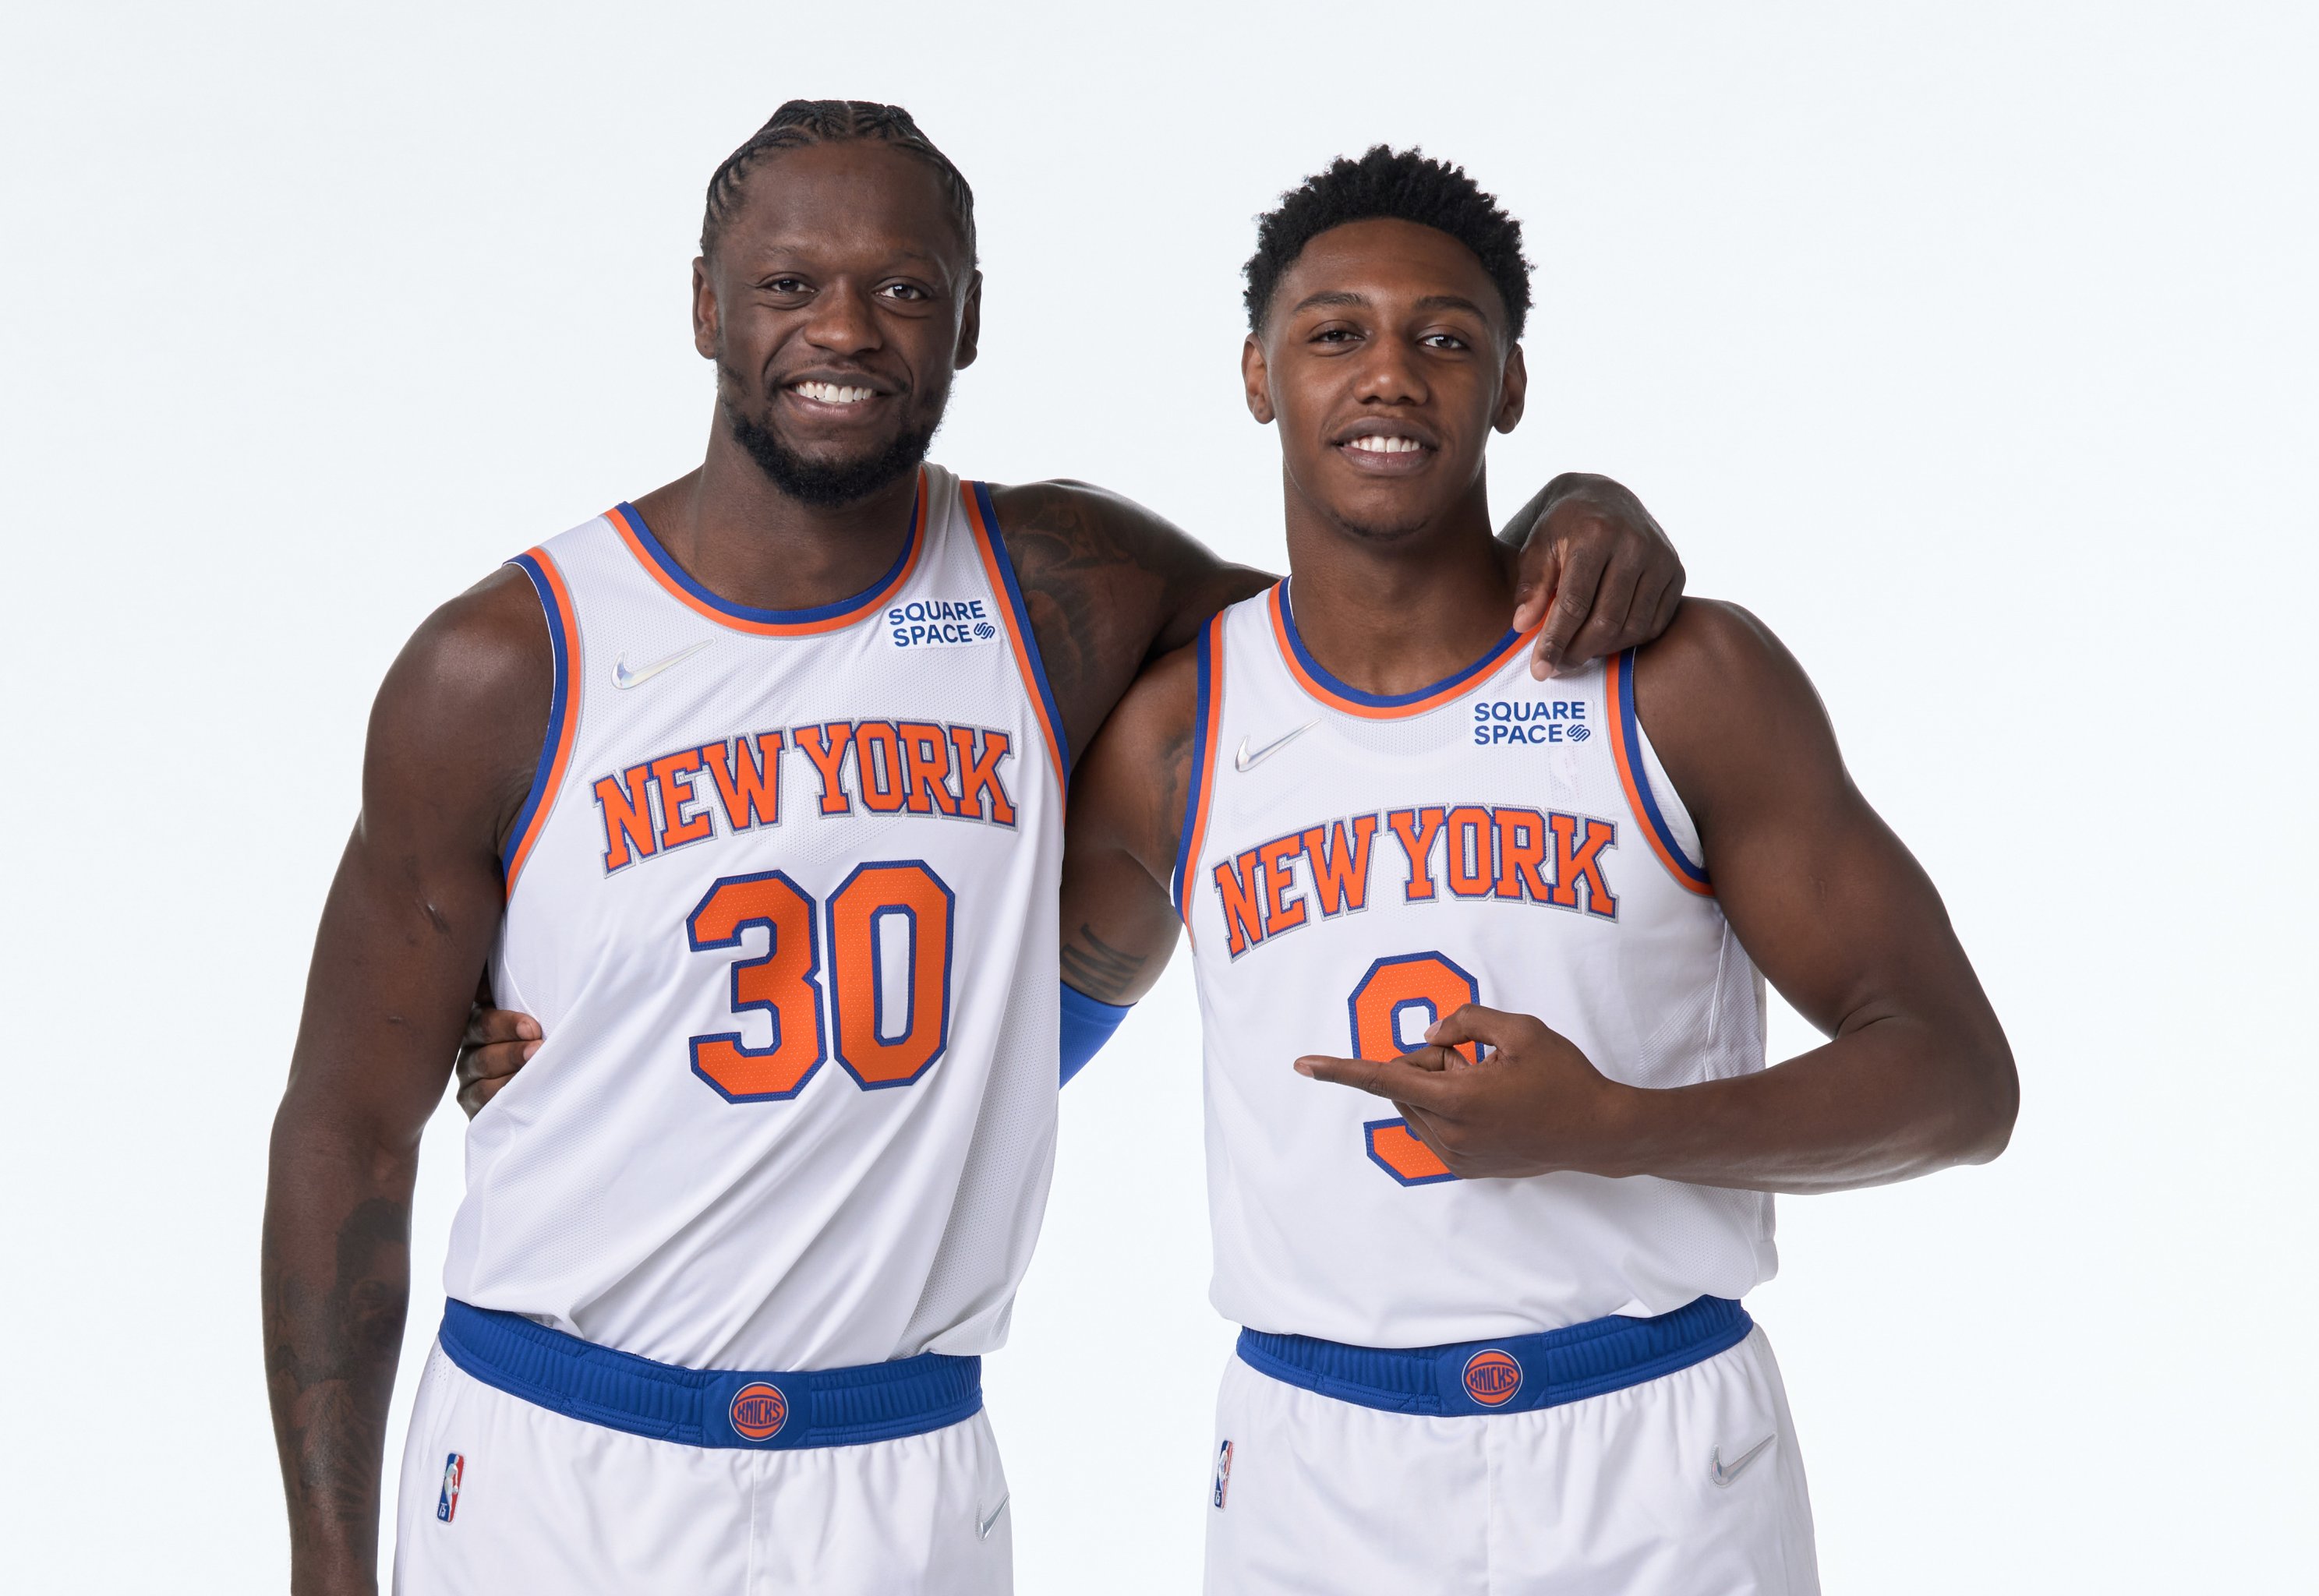 Basketball Zone - New York Knicks 2021-2022 roster (As of October